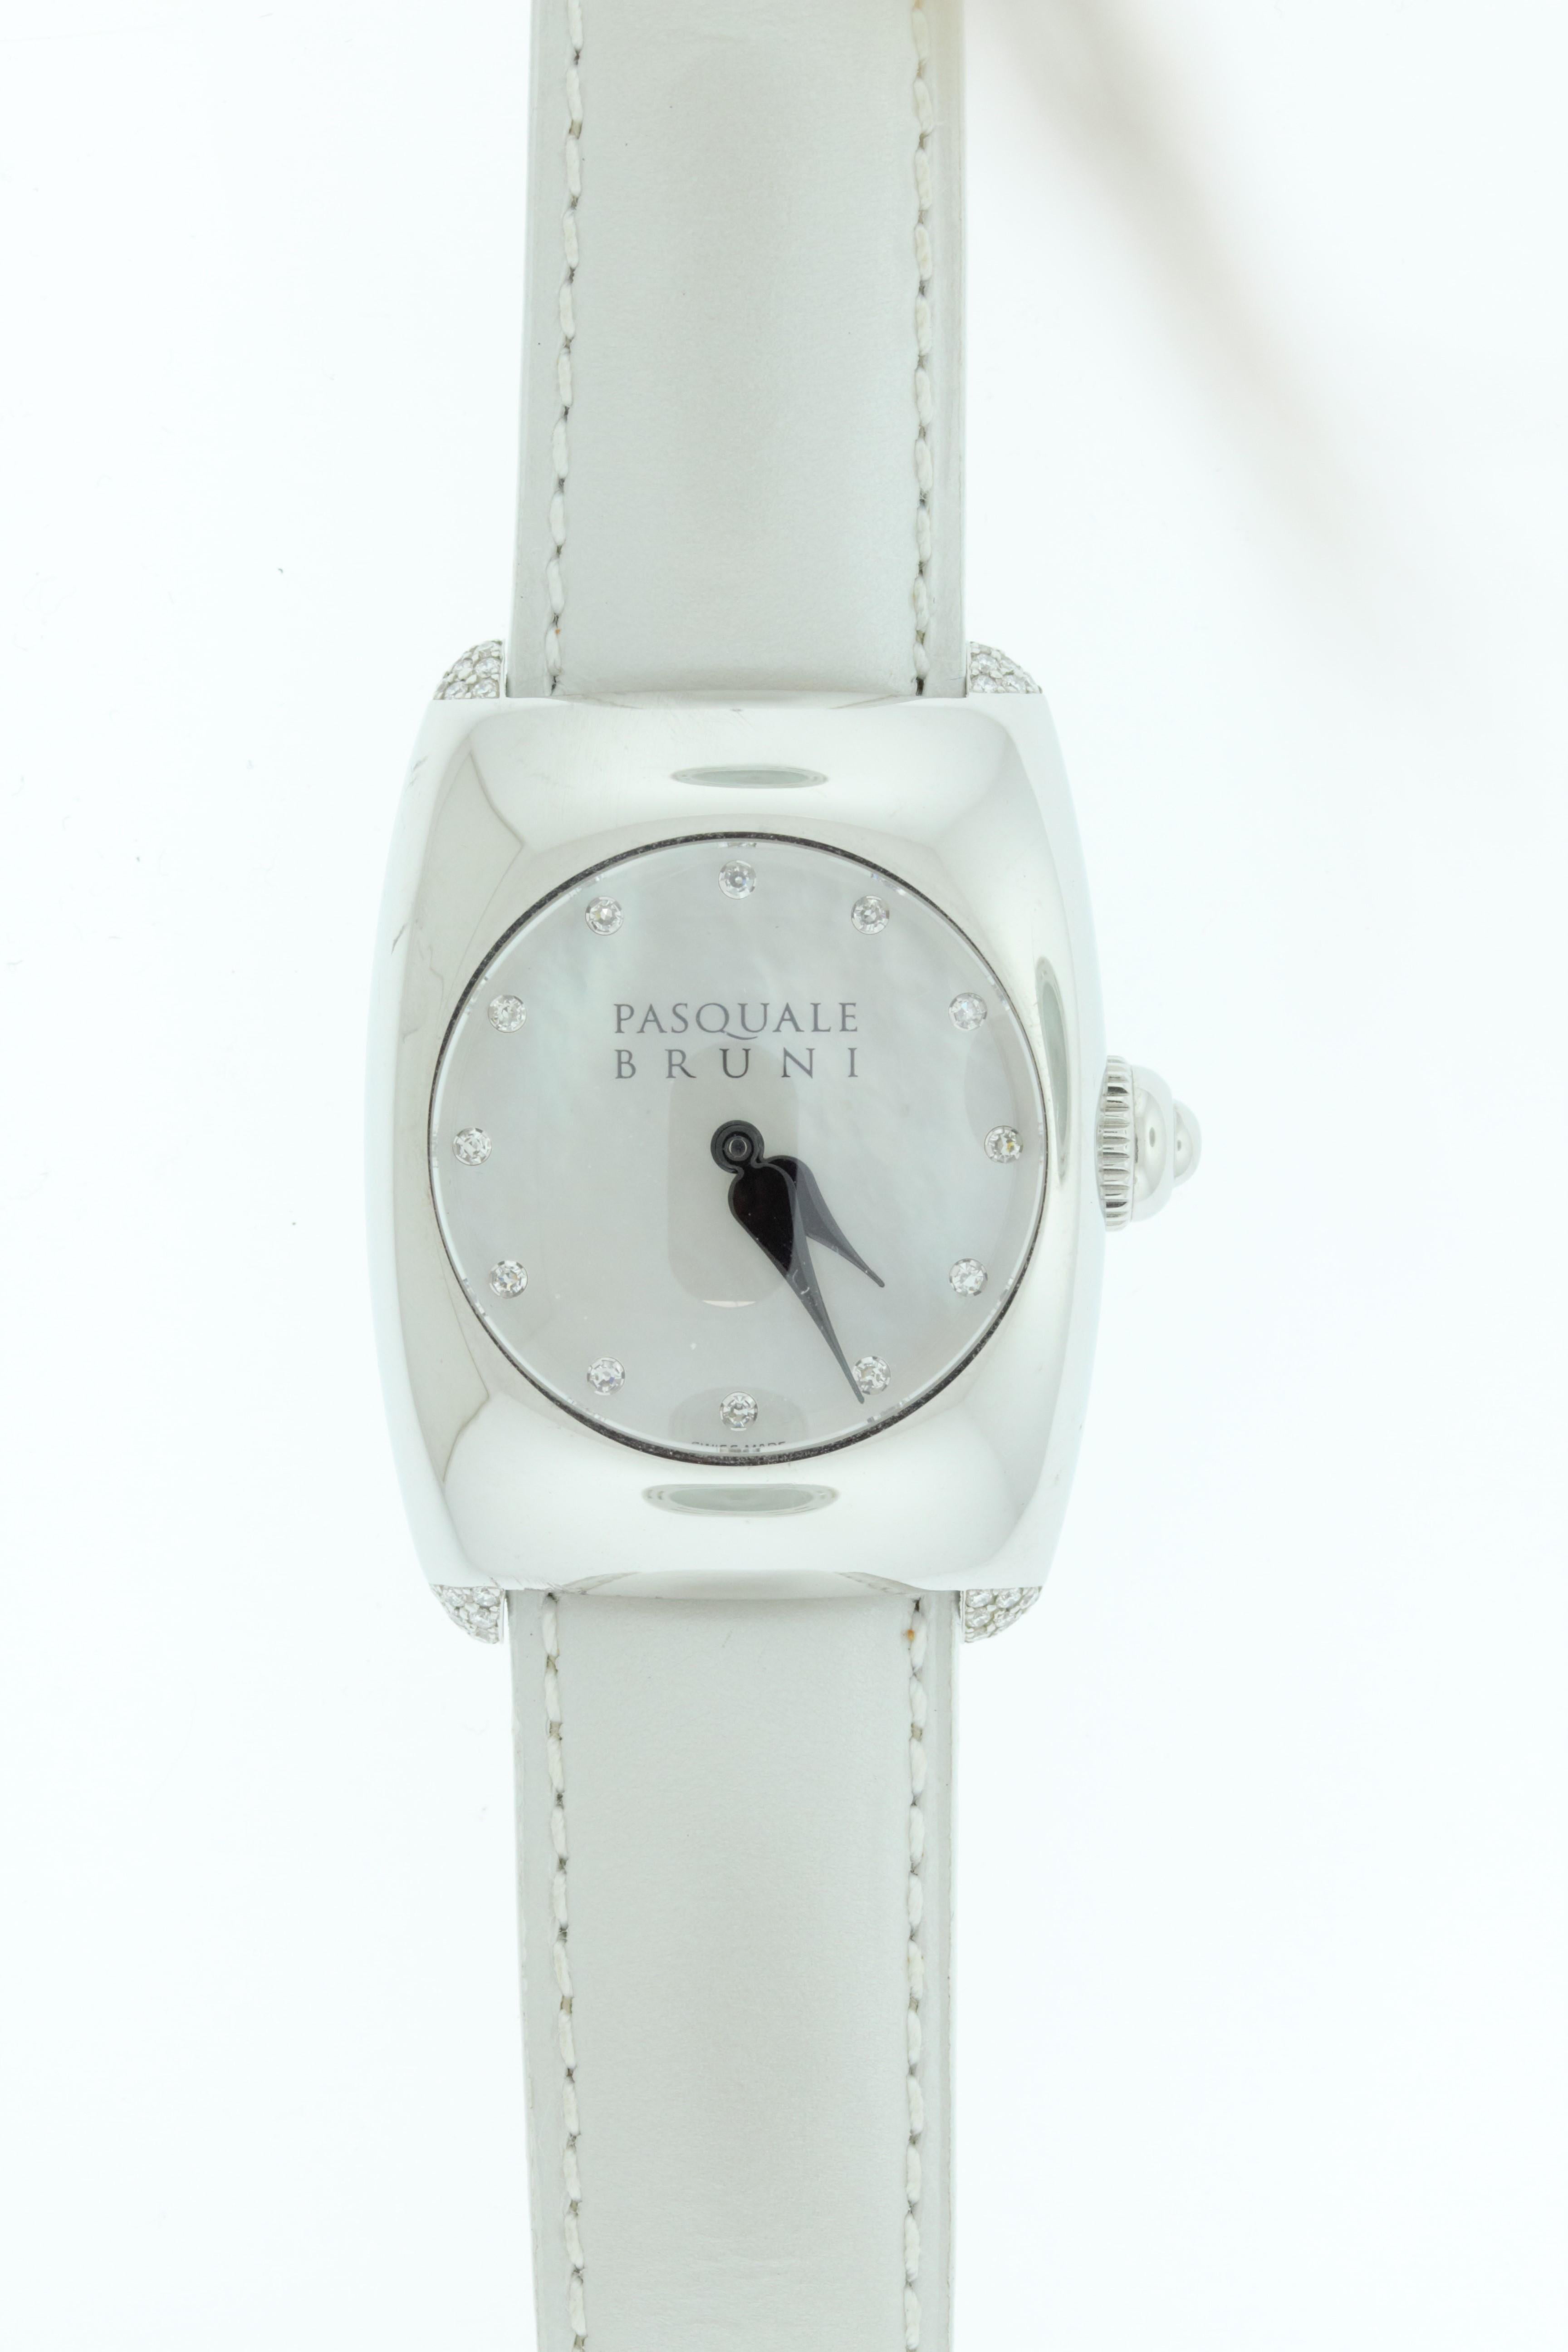 This ladies watch features a stainless steel bezel with a white face and diamond hour markers and a white leather strap. Swiss made by Pasquale Bruni. 

